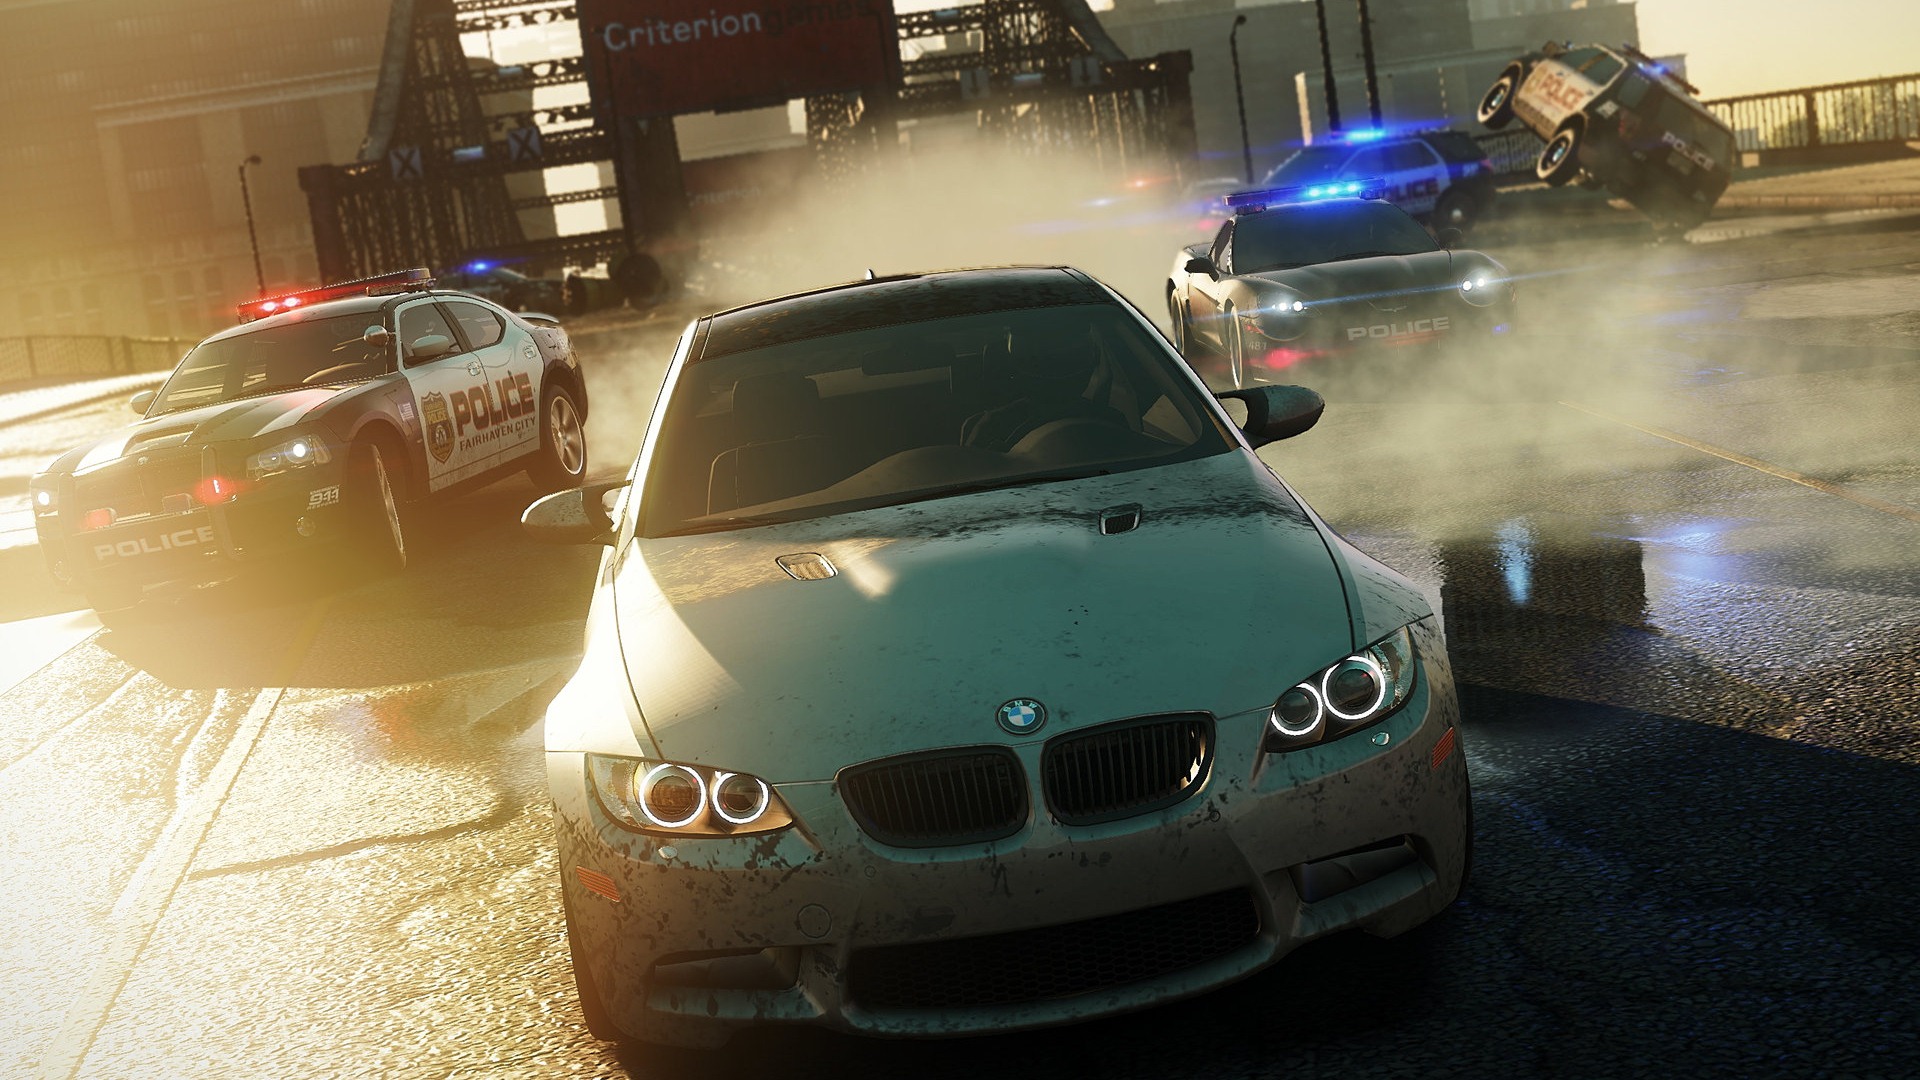 Need for Speed: Most Wanted 极品飞车17：最高通缉 高清壁纸19 - 1920x1080